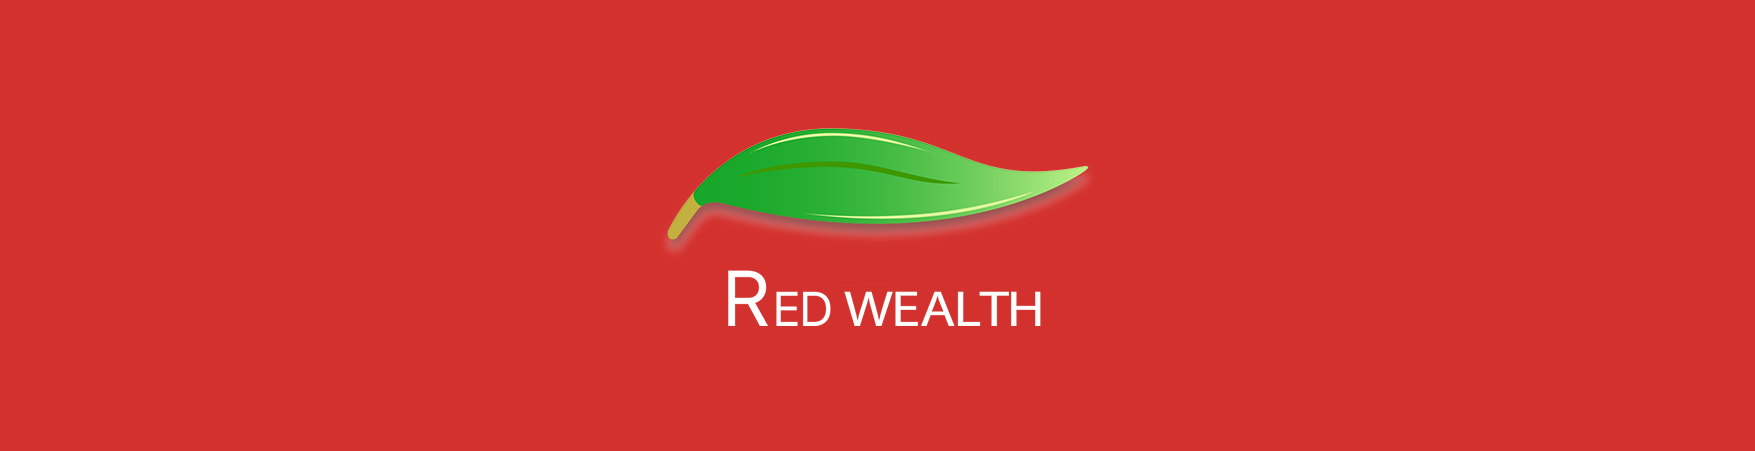 Red Wealth